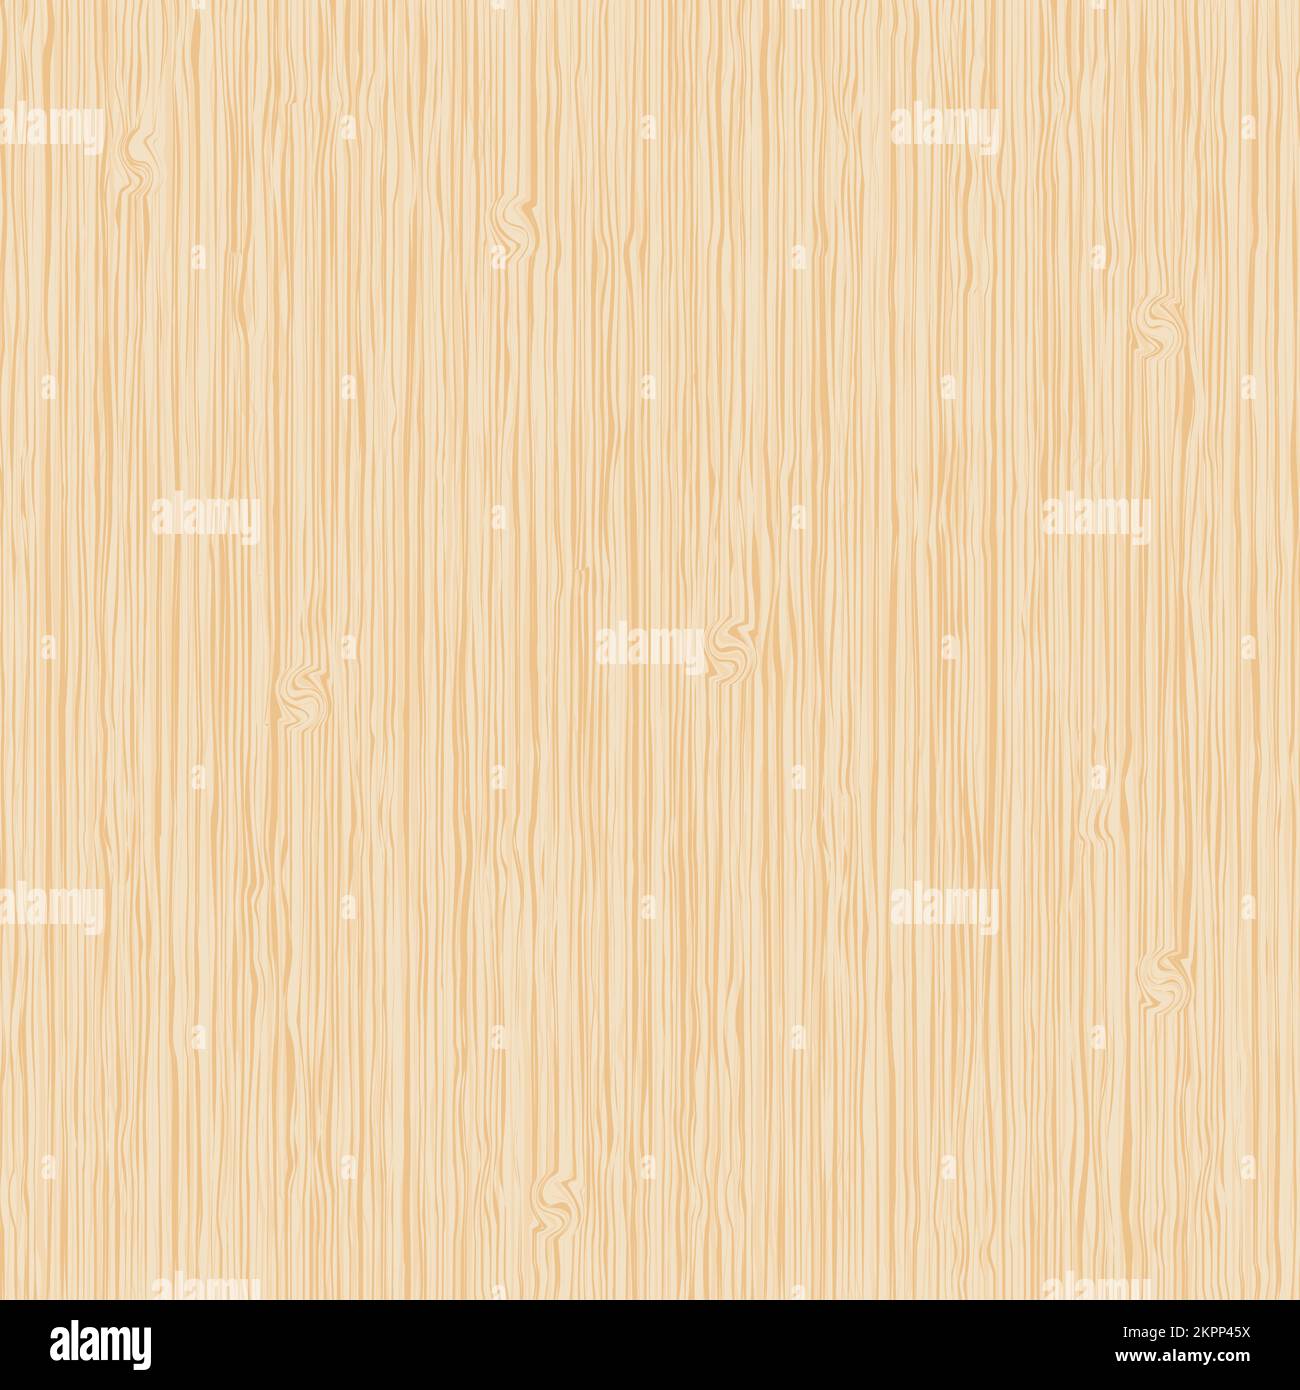 Wood texture background vector. Brown tree surface vector illustration Stock Vector